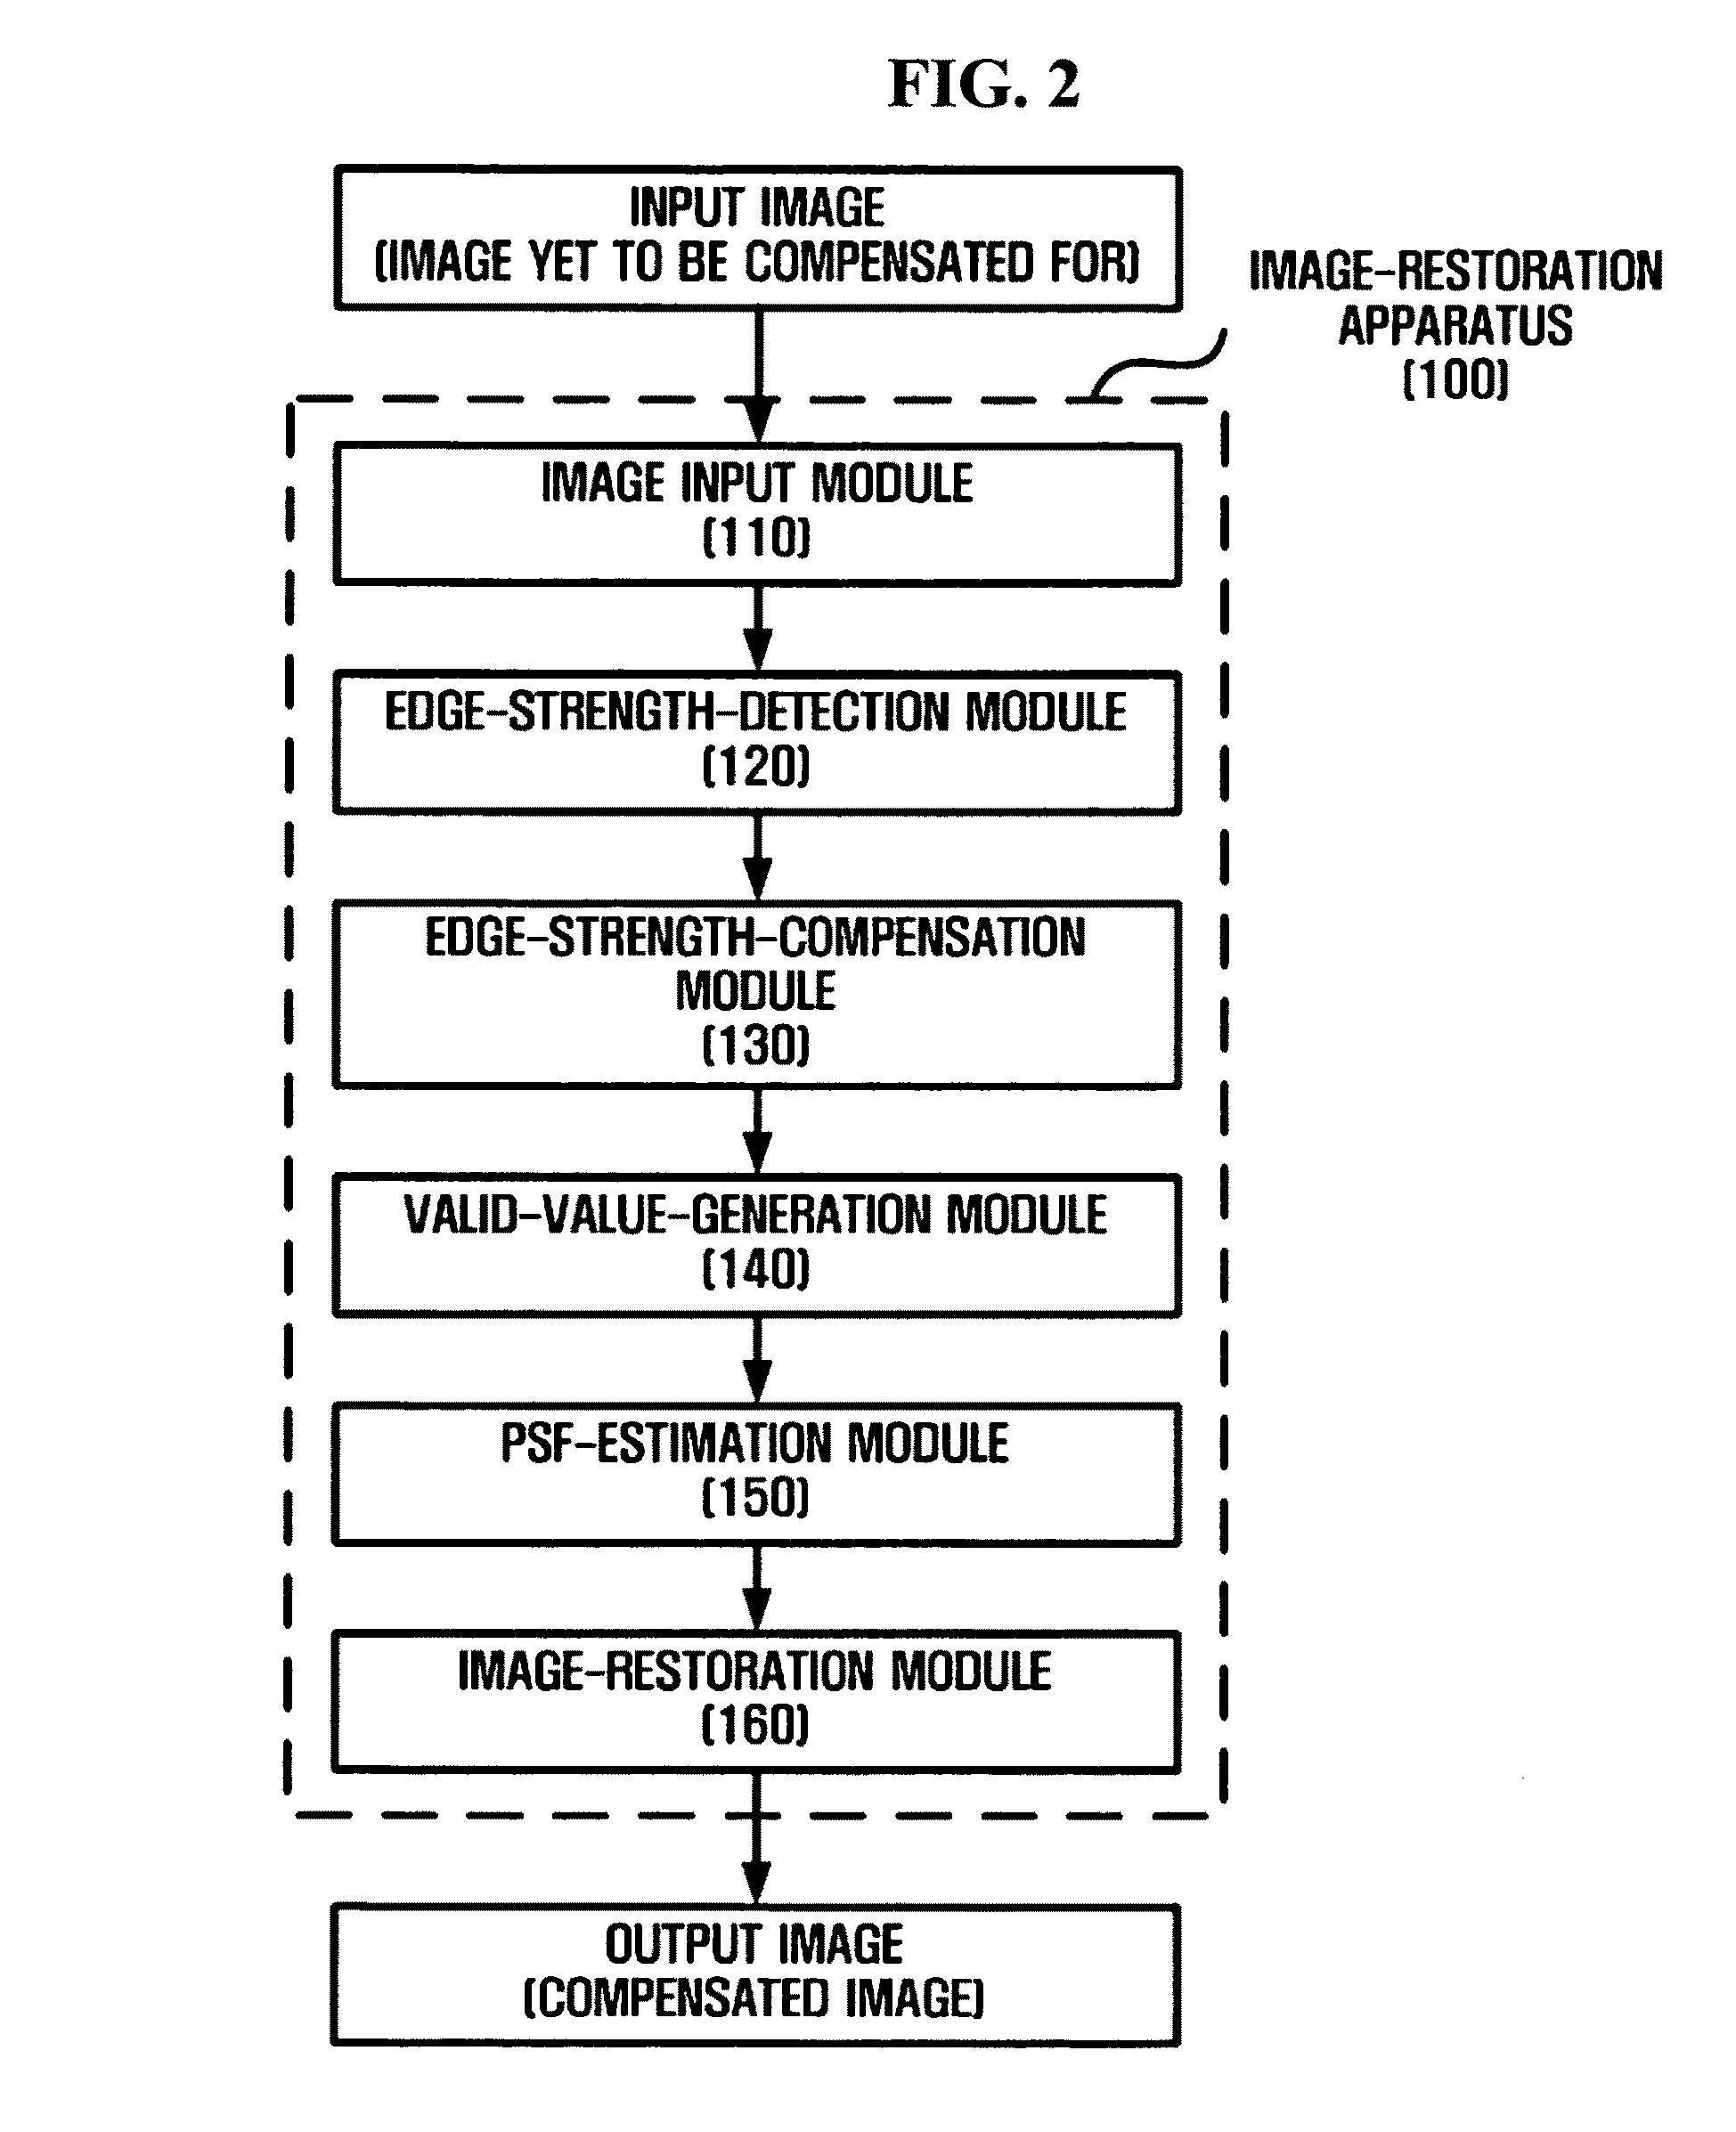 Apparatus and method for restoring image based on distance-specific point spread function